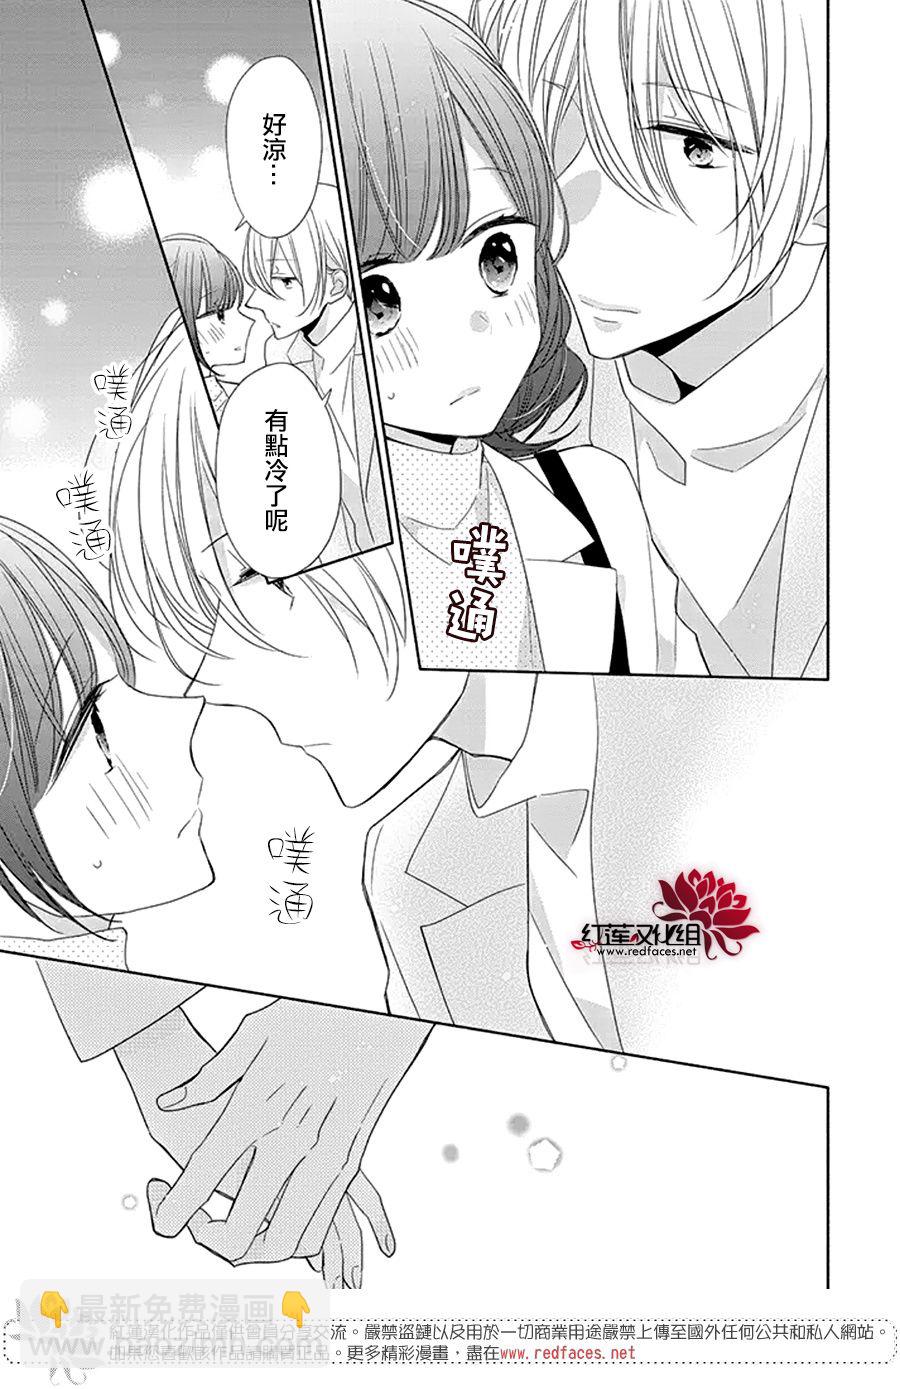 If given a second chance - 25話 - 3